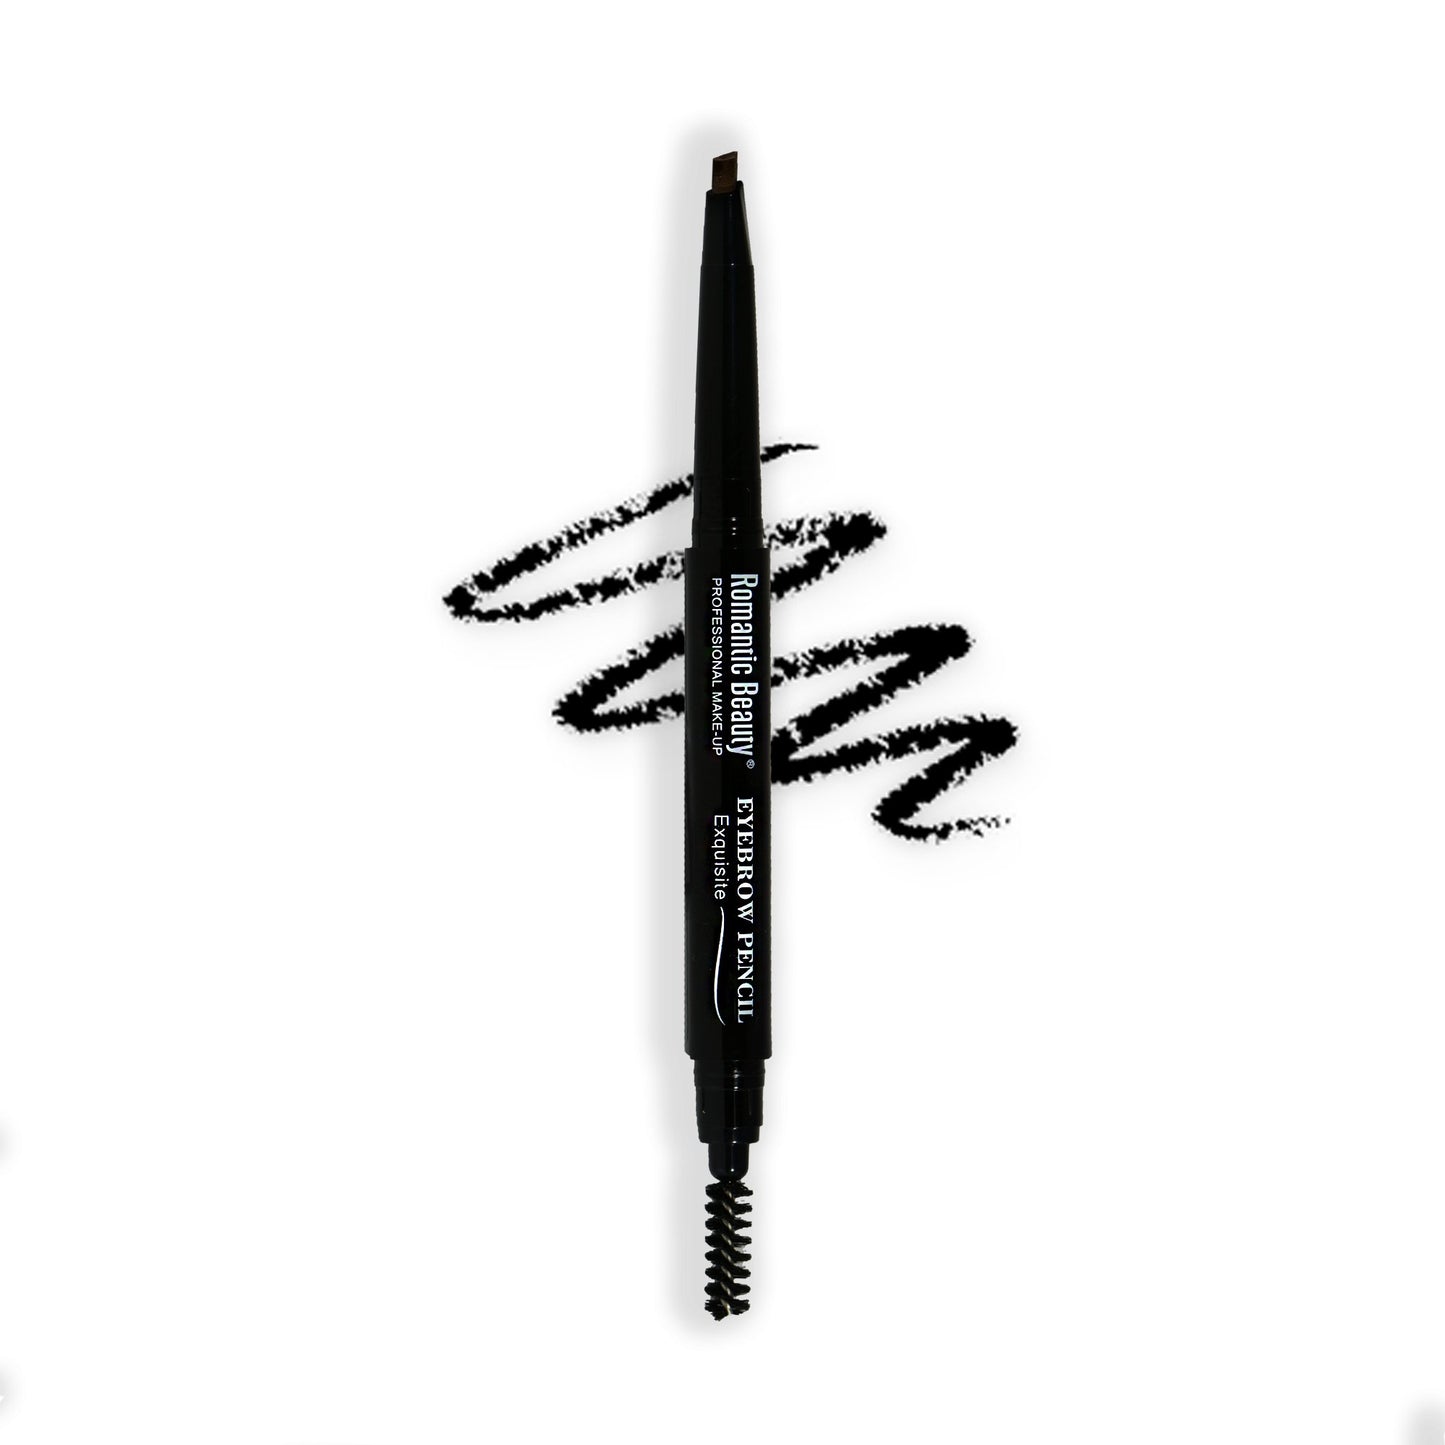 Exquisite Eyebrow Pencil - Black - Skin Tone Beauty Products